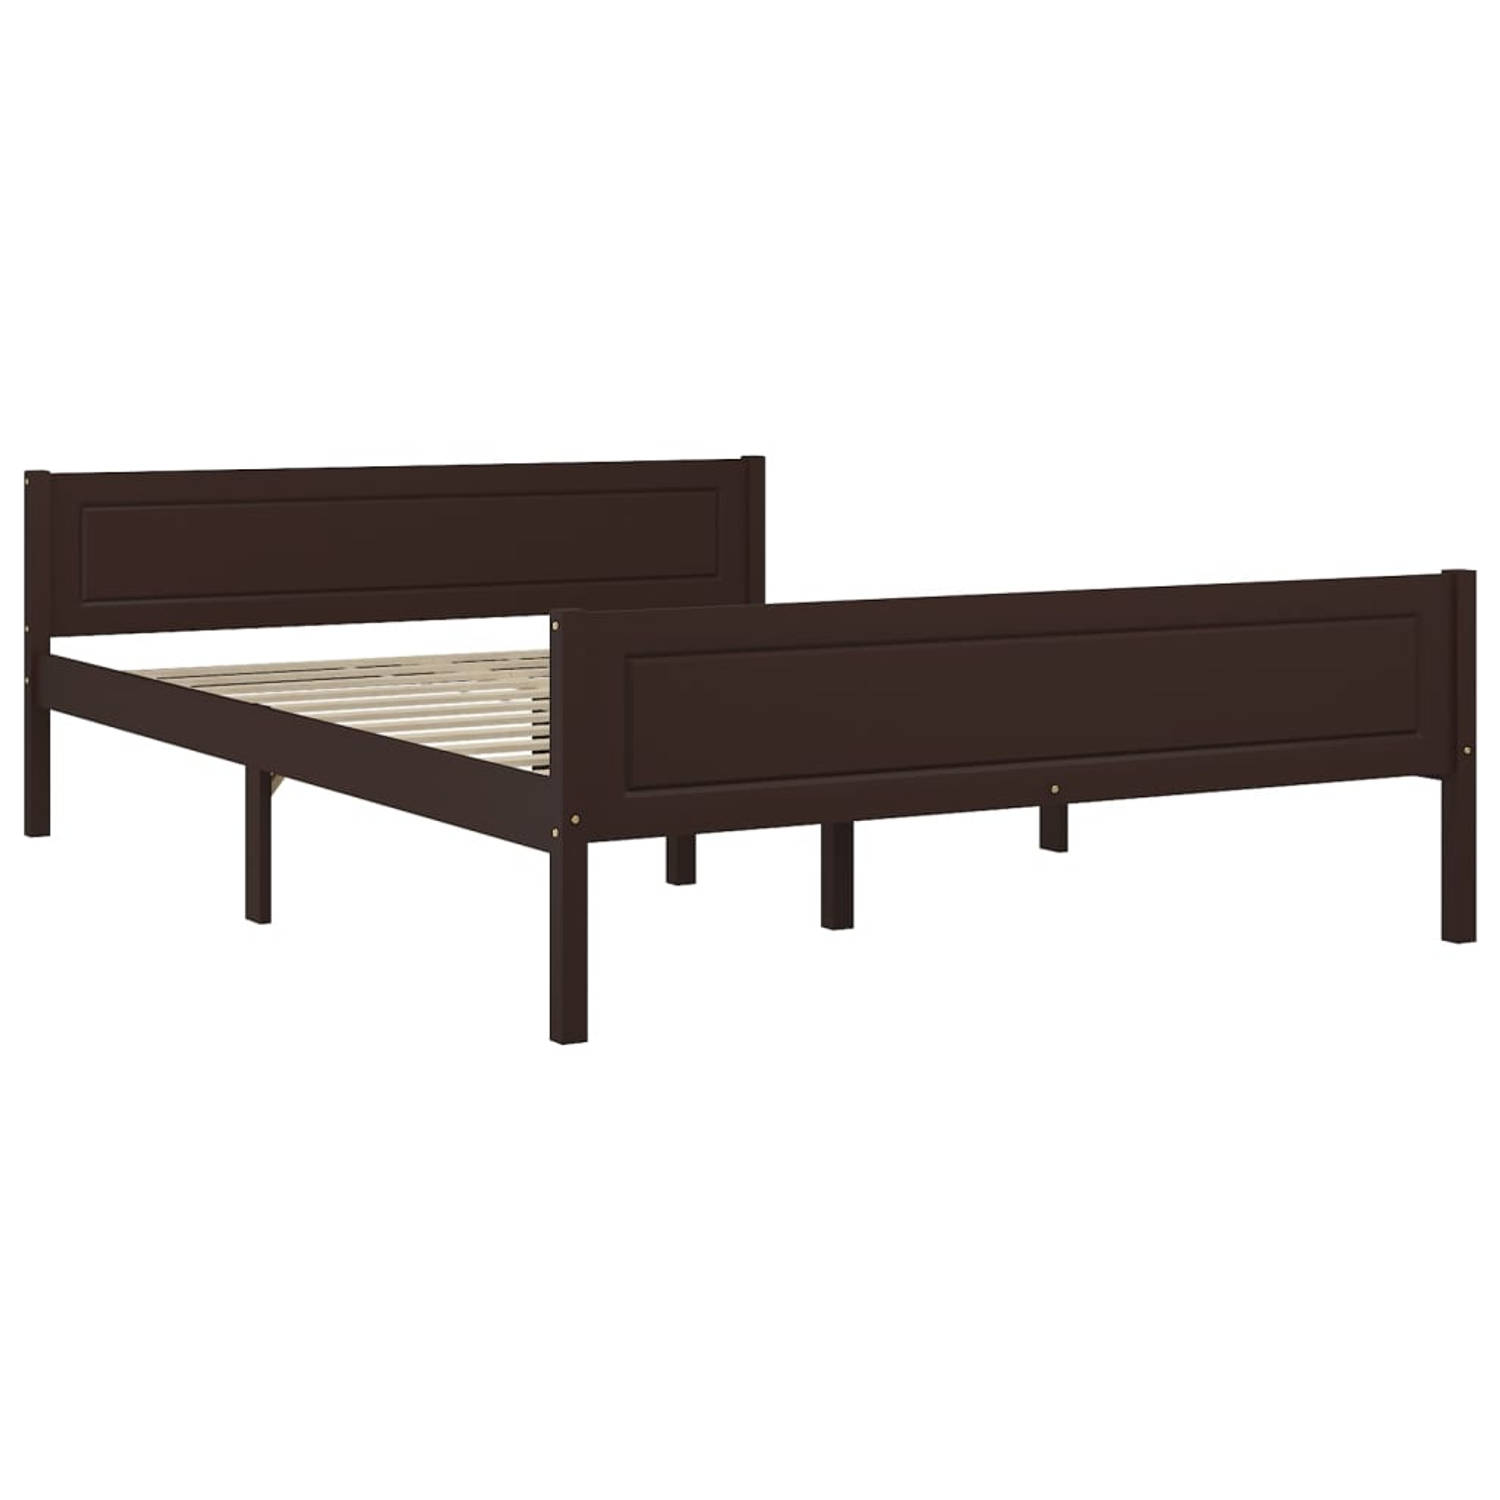 The Living Store Bedframe massief grenenhout donkerbruin 140x200 cm - Bedframe - Bedframe - Bed Frame - Bed Frames - Bed - Bedden - 2-persoonsbed - 2-persoonsbedden - Tweepersoons